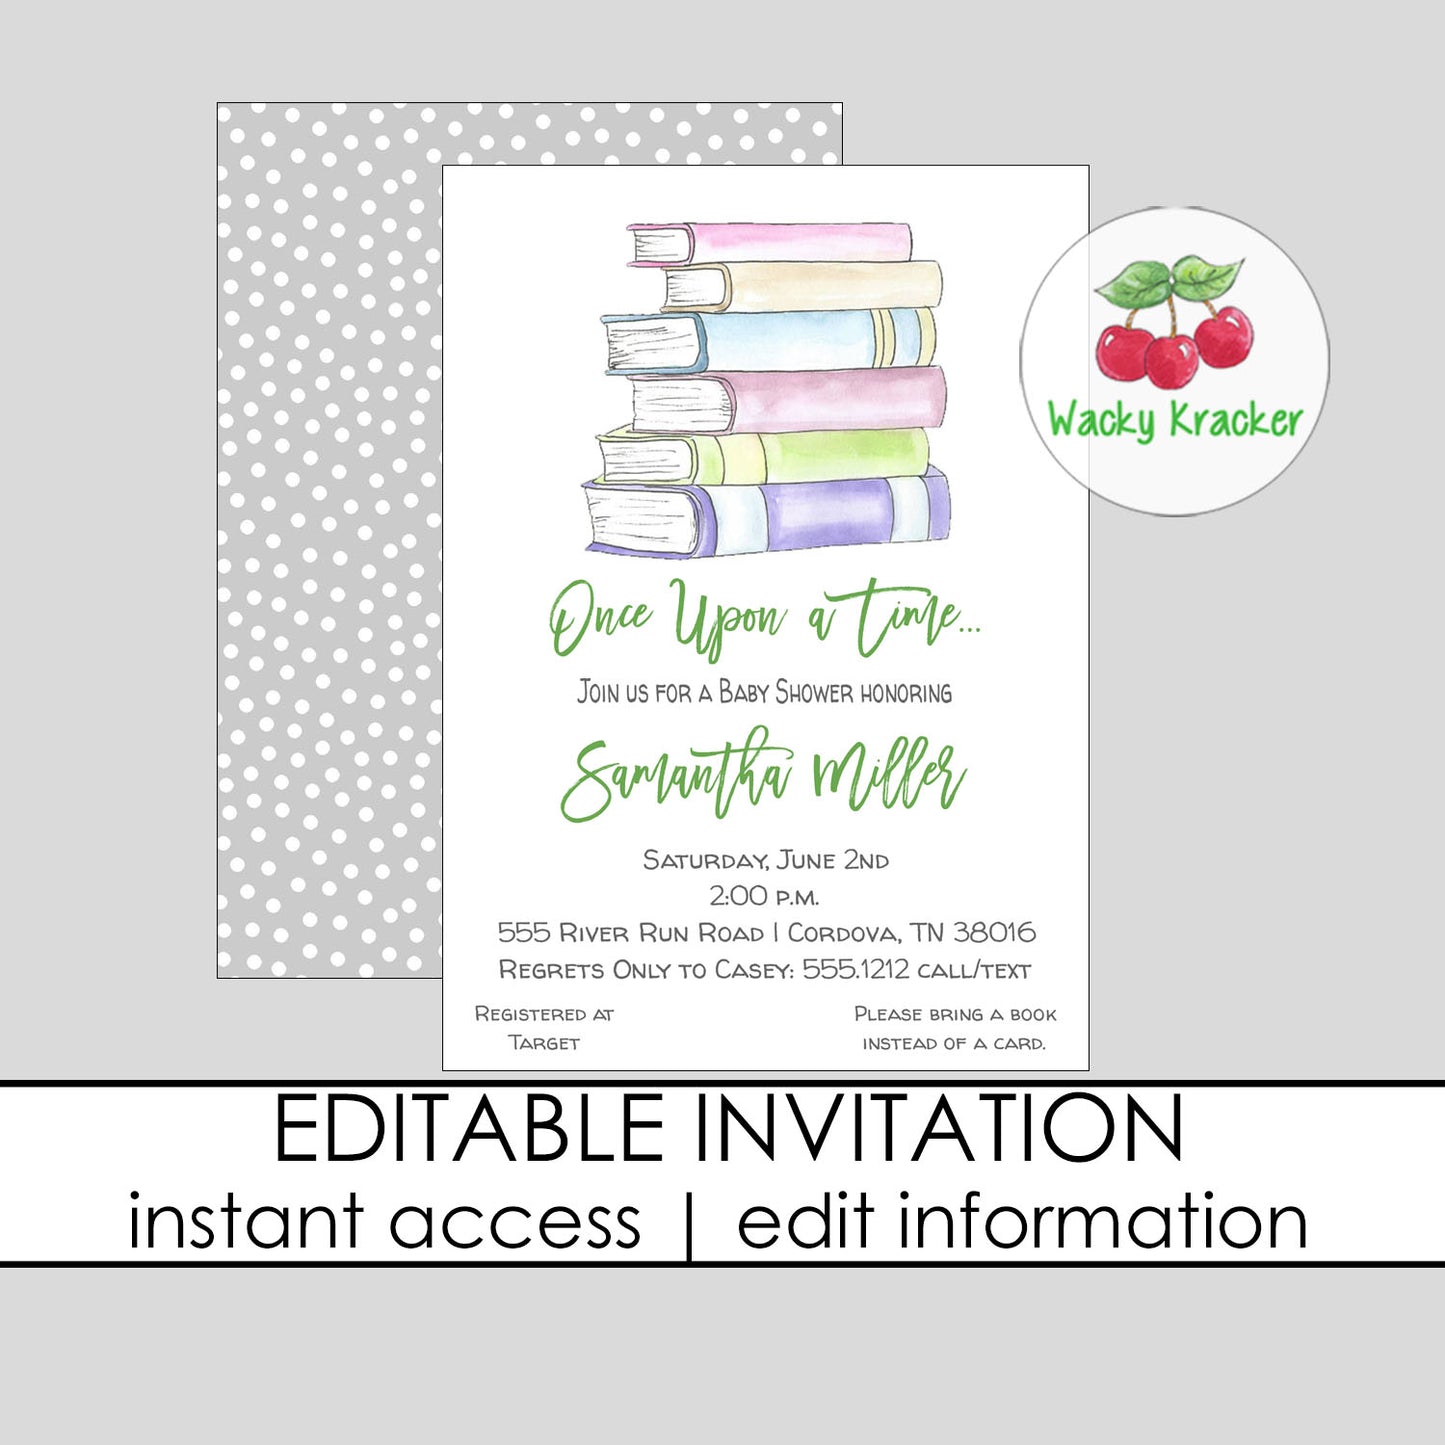 Books for Baby Shower Invitation (Copy)